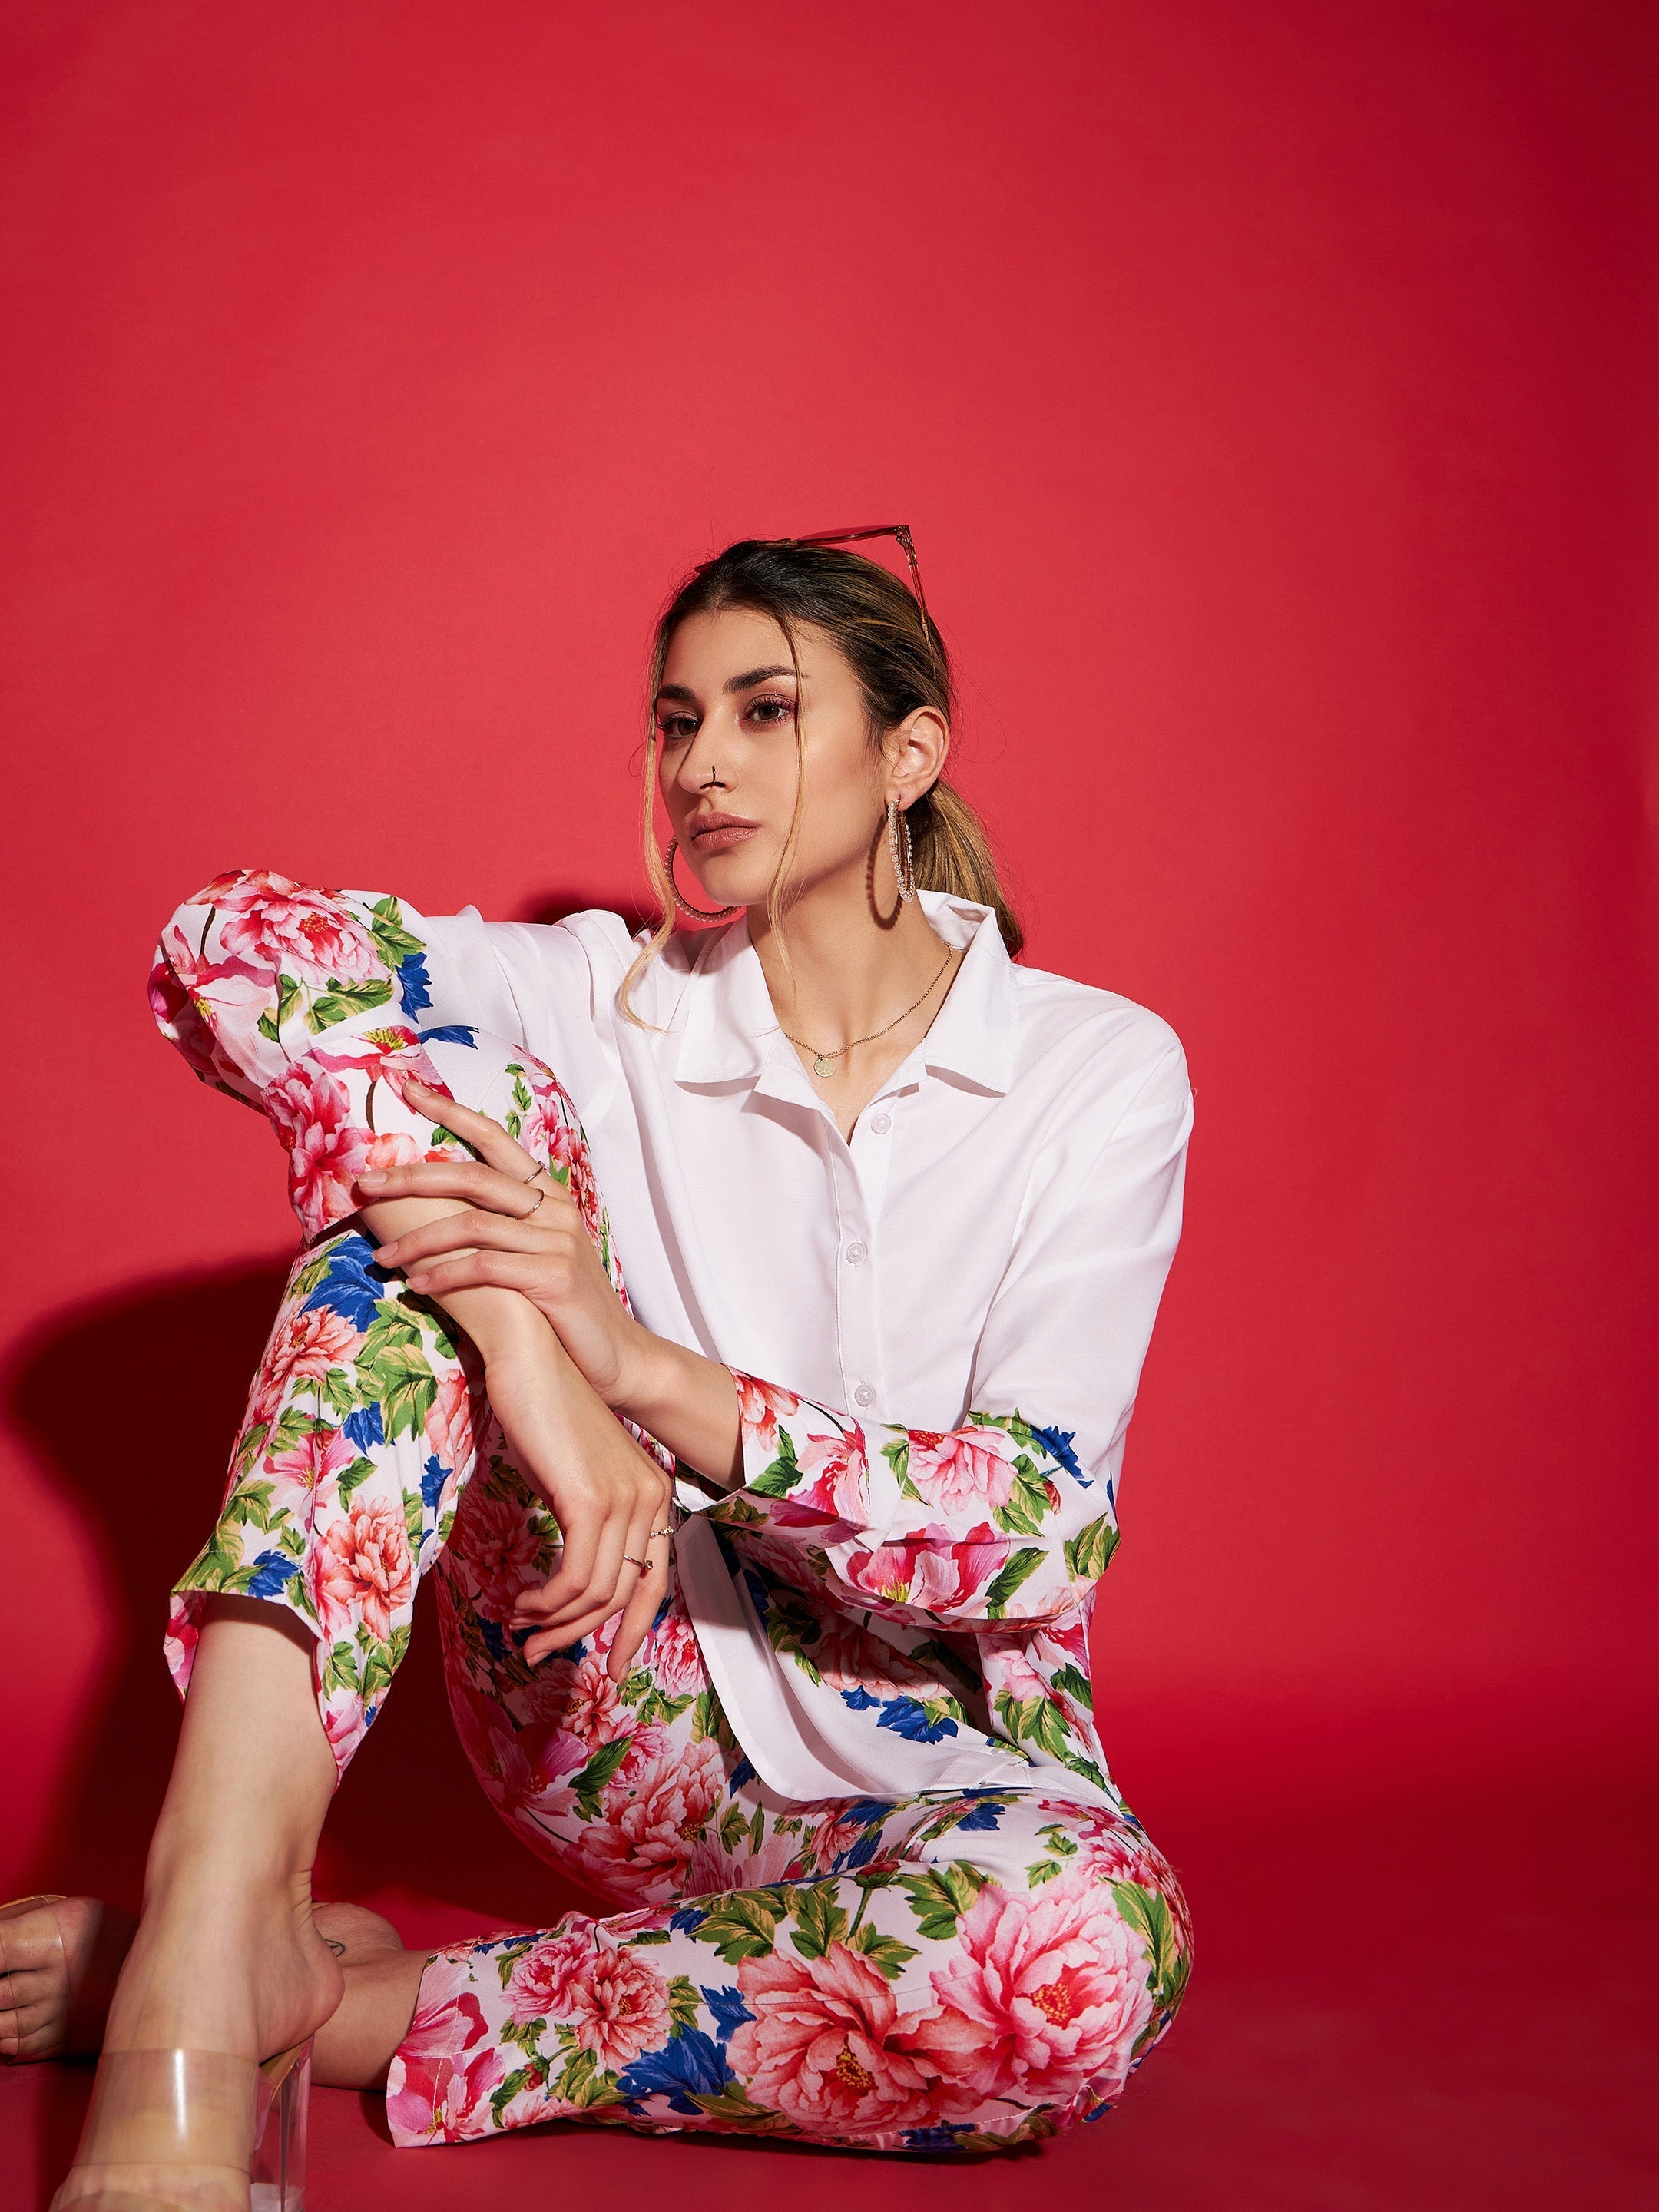 Women's White Floral Oversized Shirt With Tapered Pants - SASSAFRAS